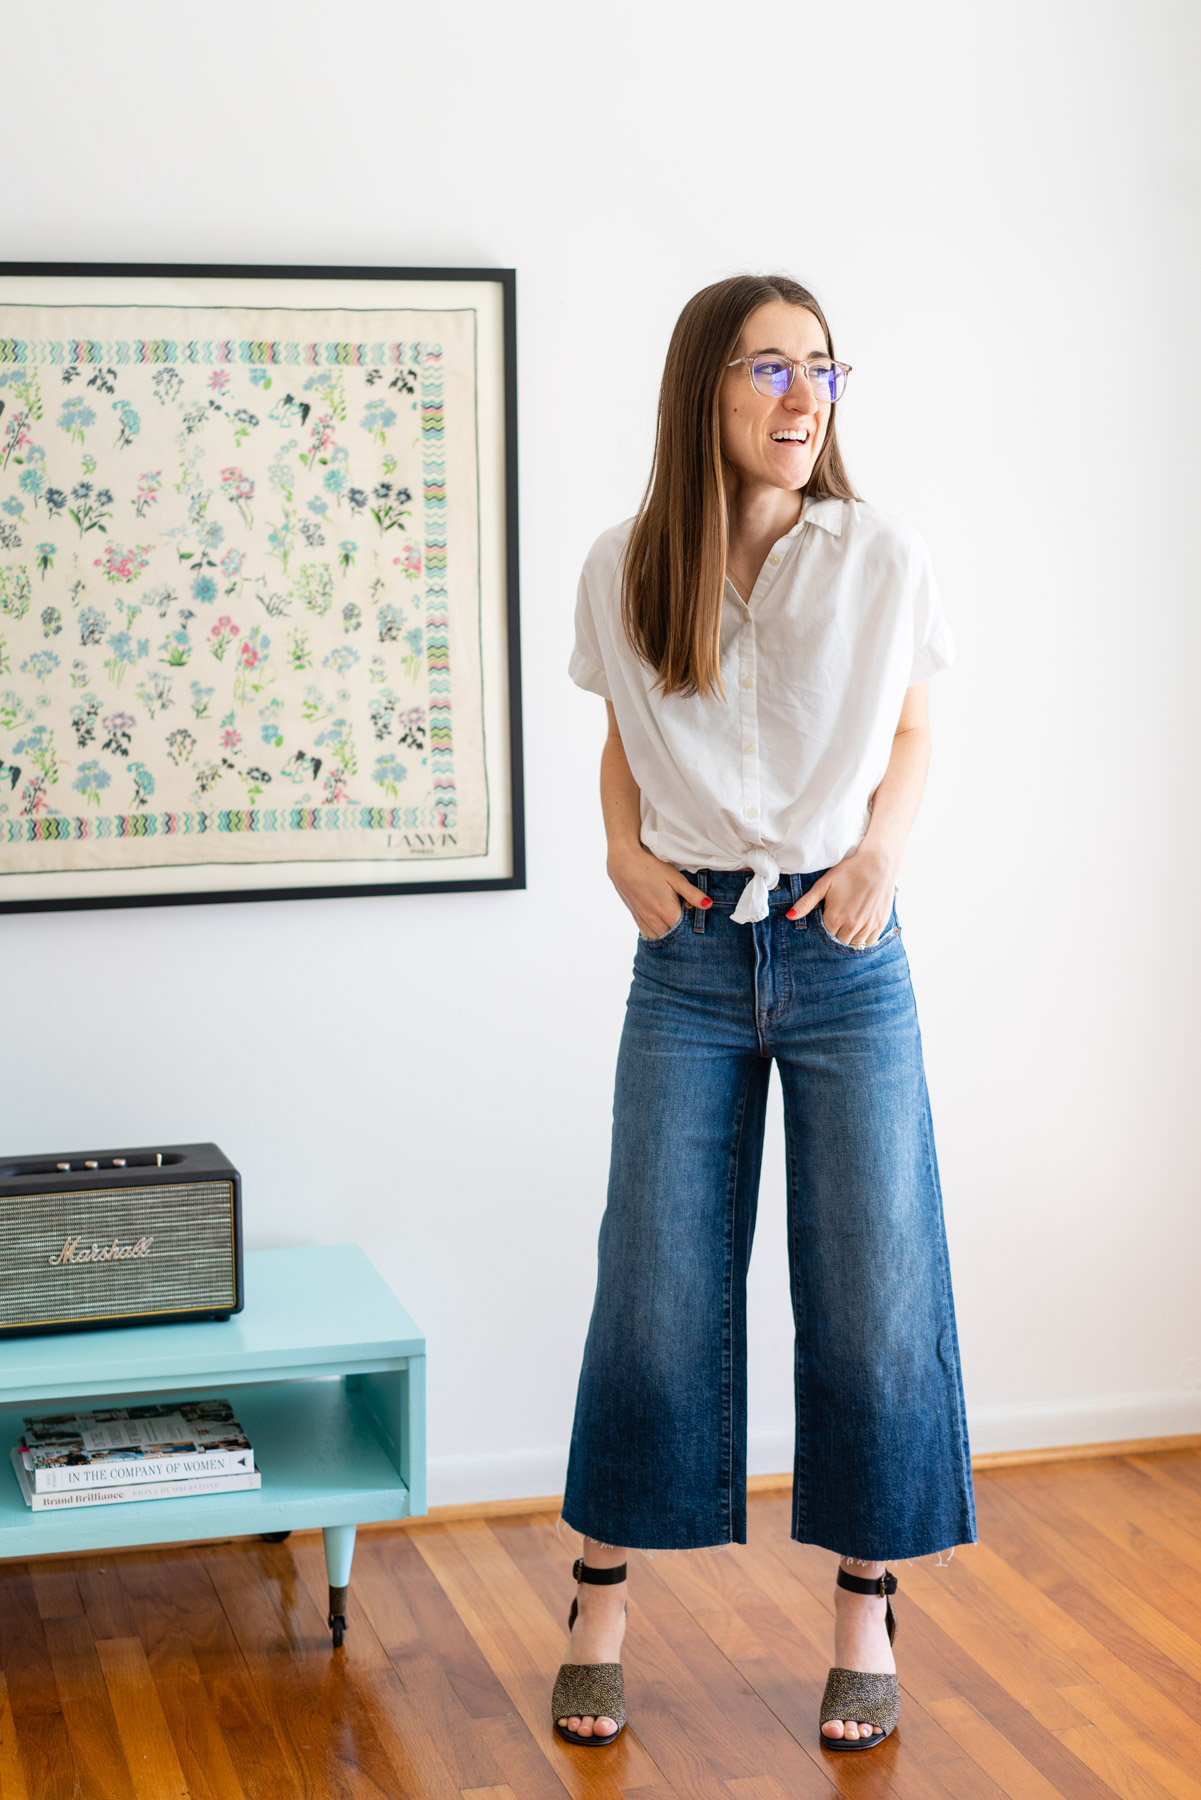 Woman modeling Madewell's Wide Leg jeans for a Madewell jeans review with a white button up shirt tied at the waist